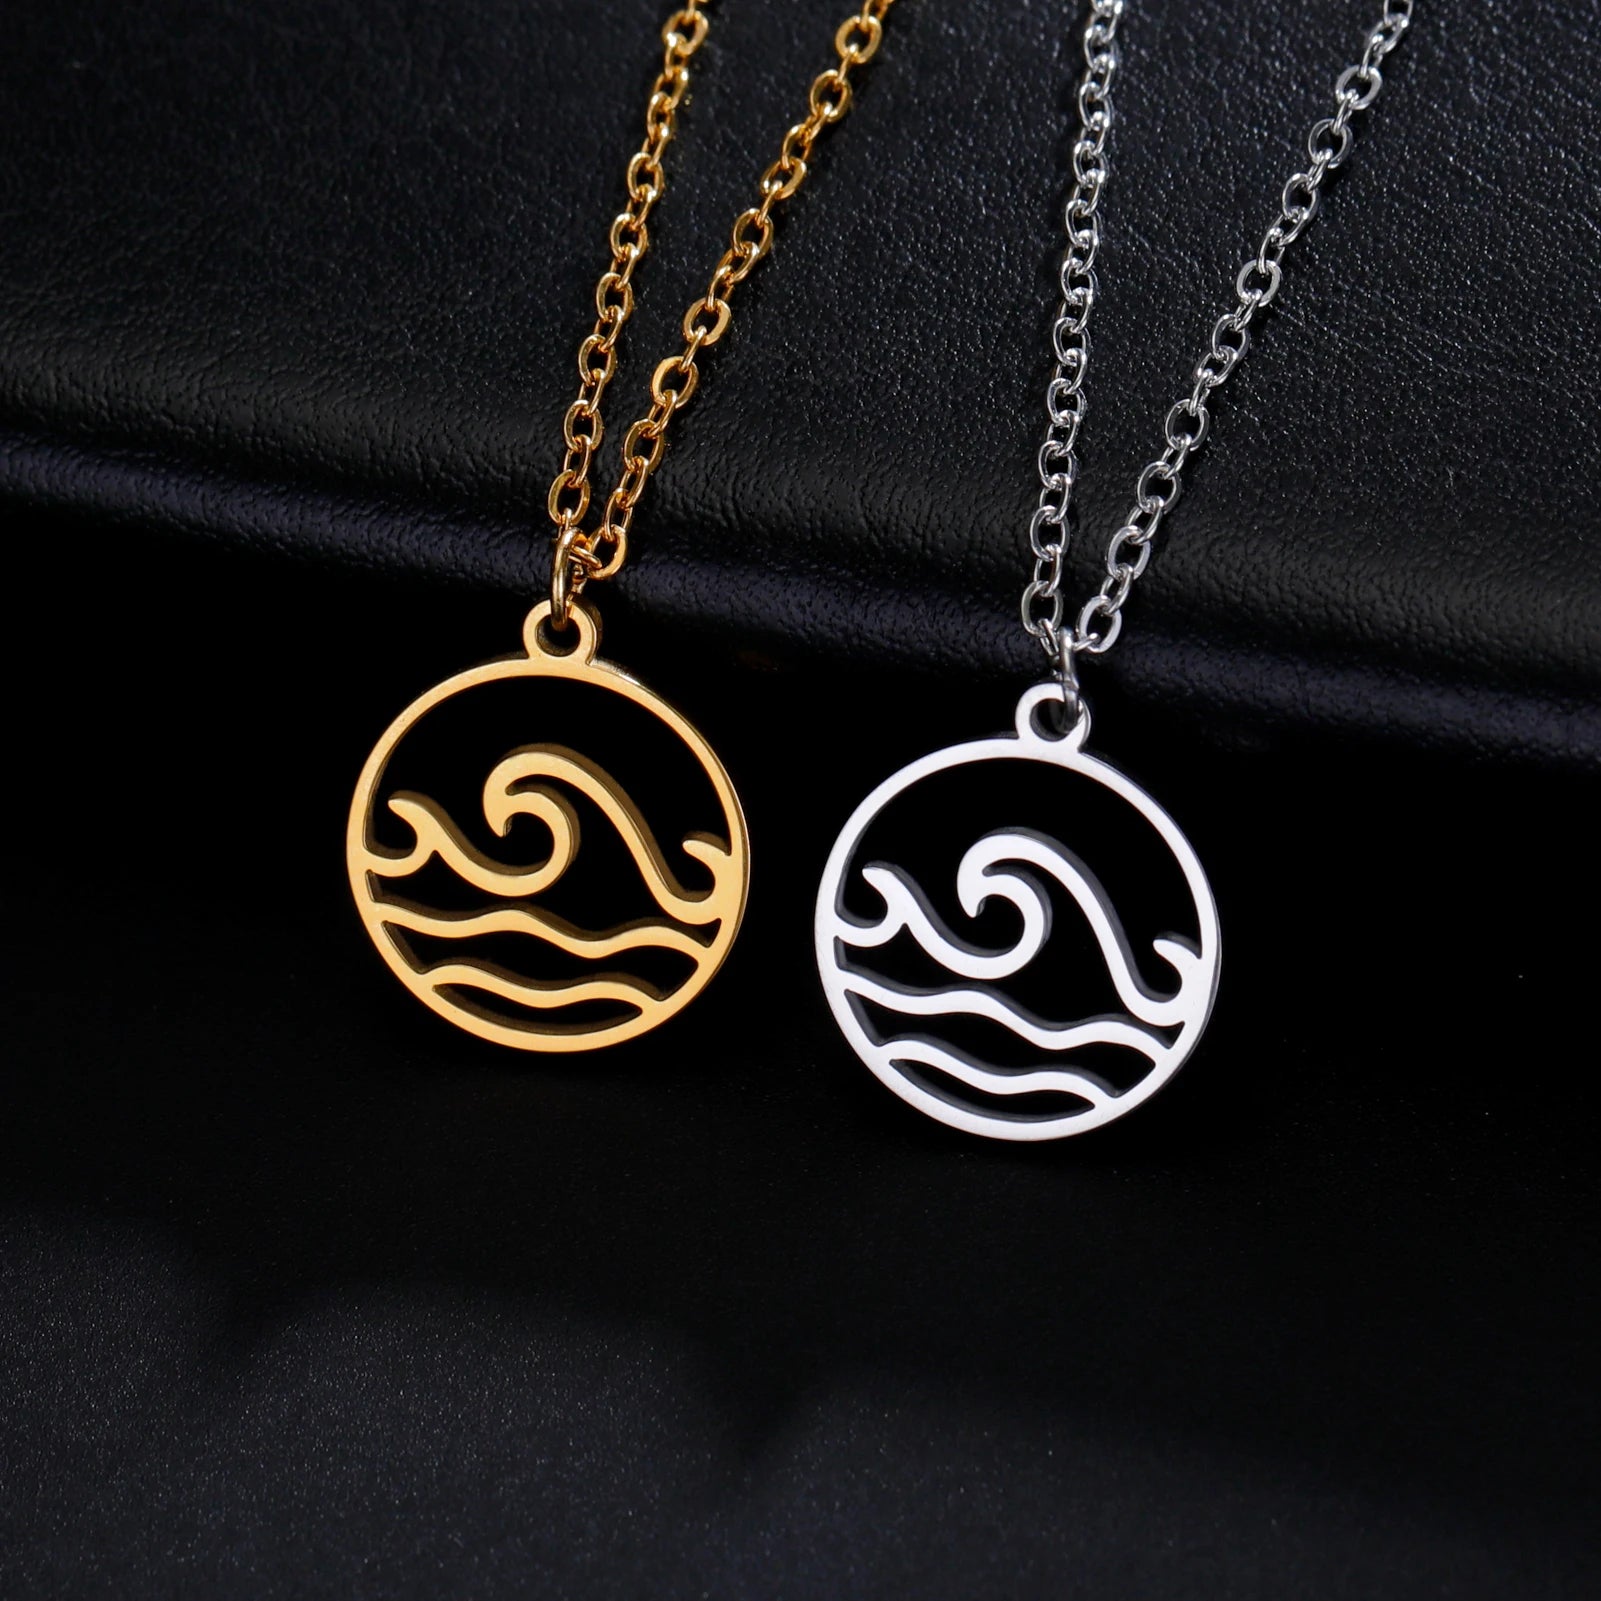 Sea Wave Stainless Steel Pendant Necklace